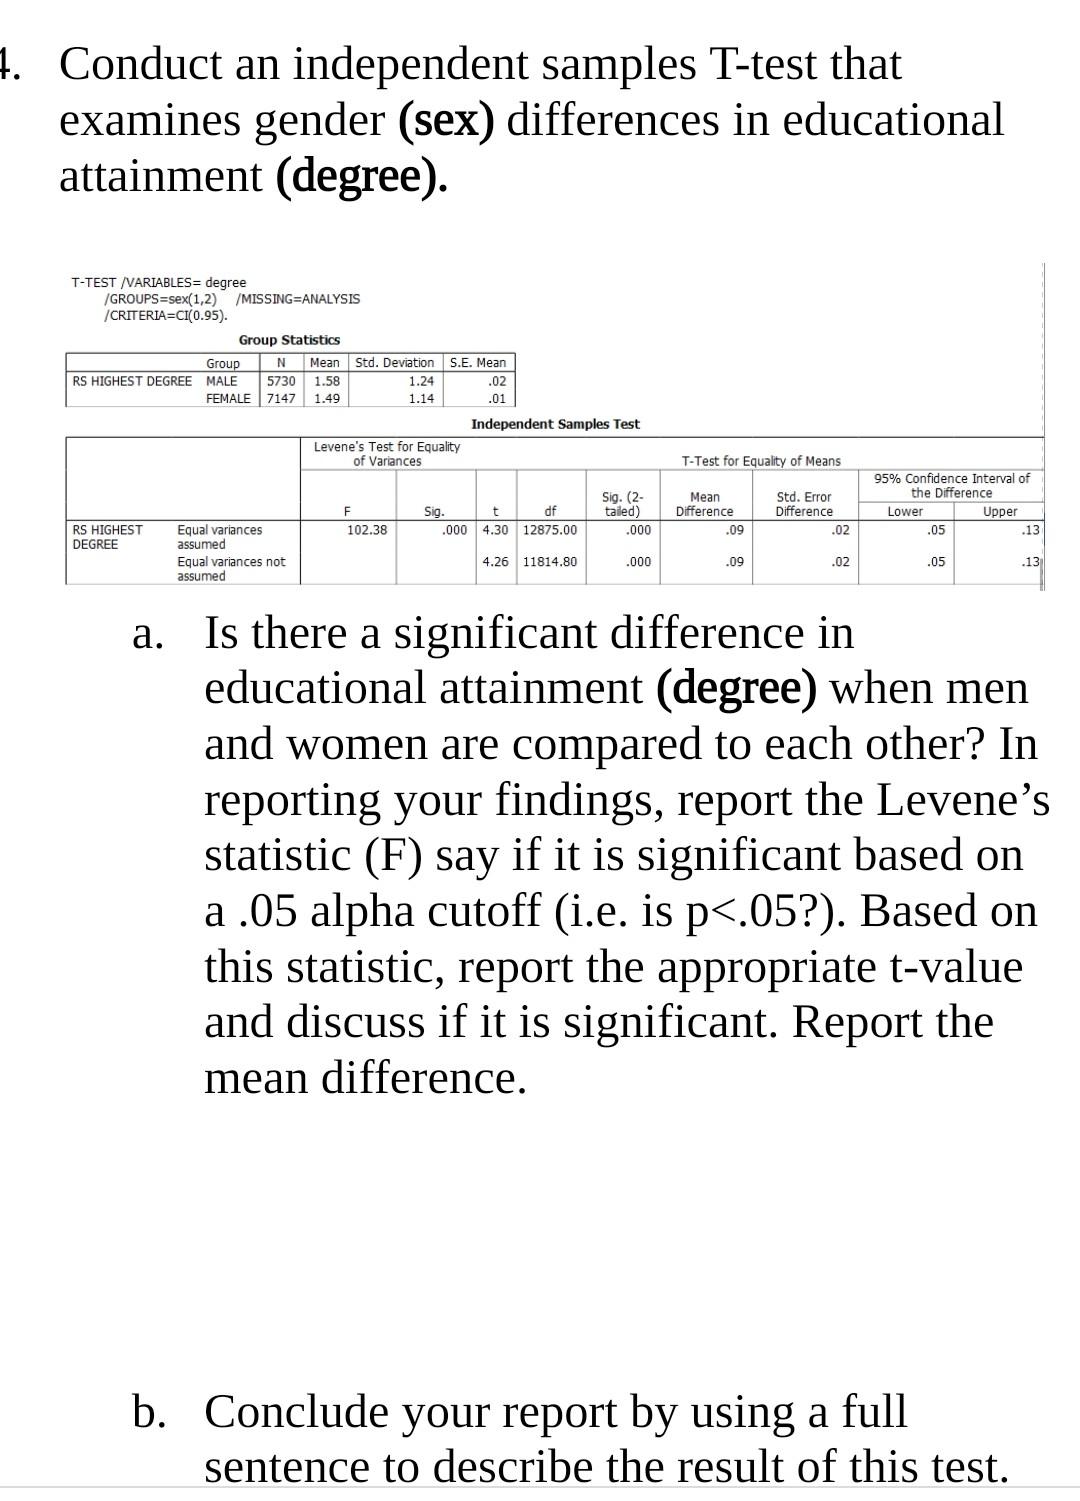 4. Conduct an independent samples T-test that examines gender (sex) differences in educational attainment